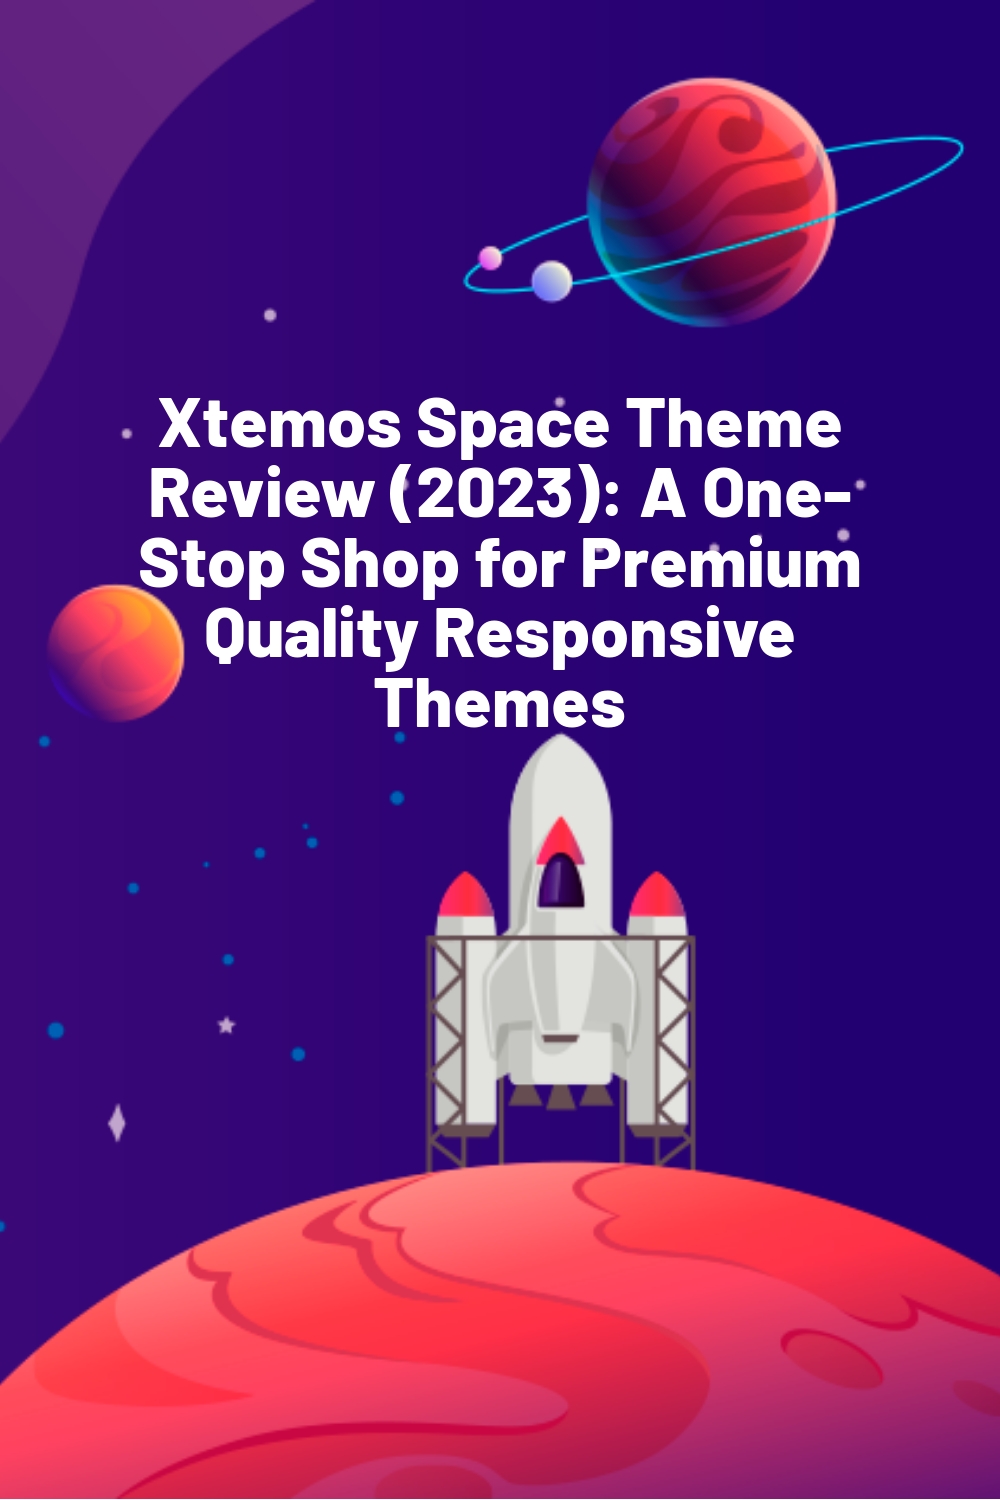 Xtemos Space Theme Review (2023): A One-Stop Shop for Premium Quality Responsive Themes